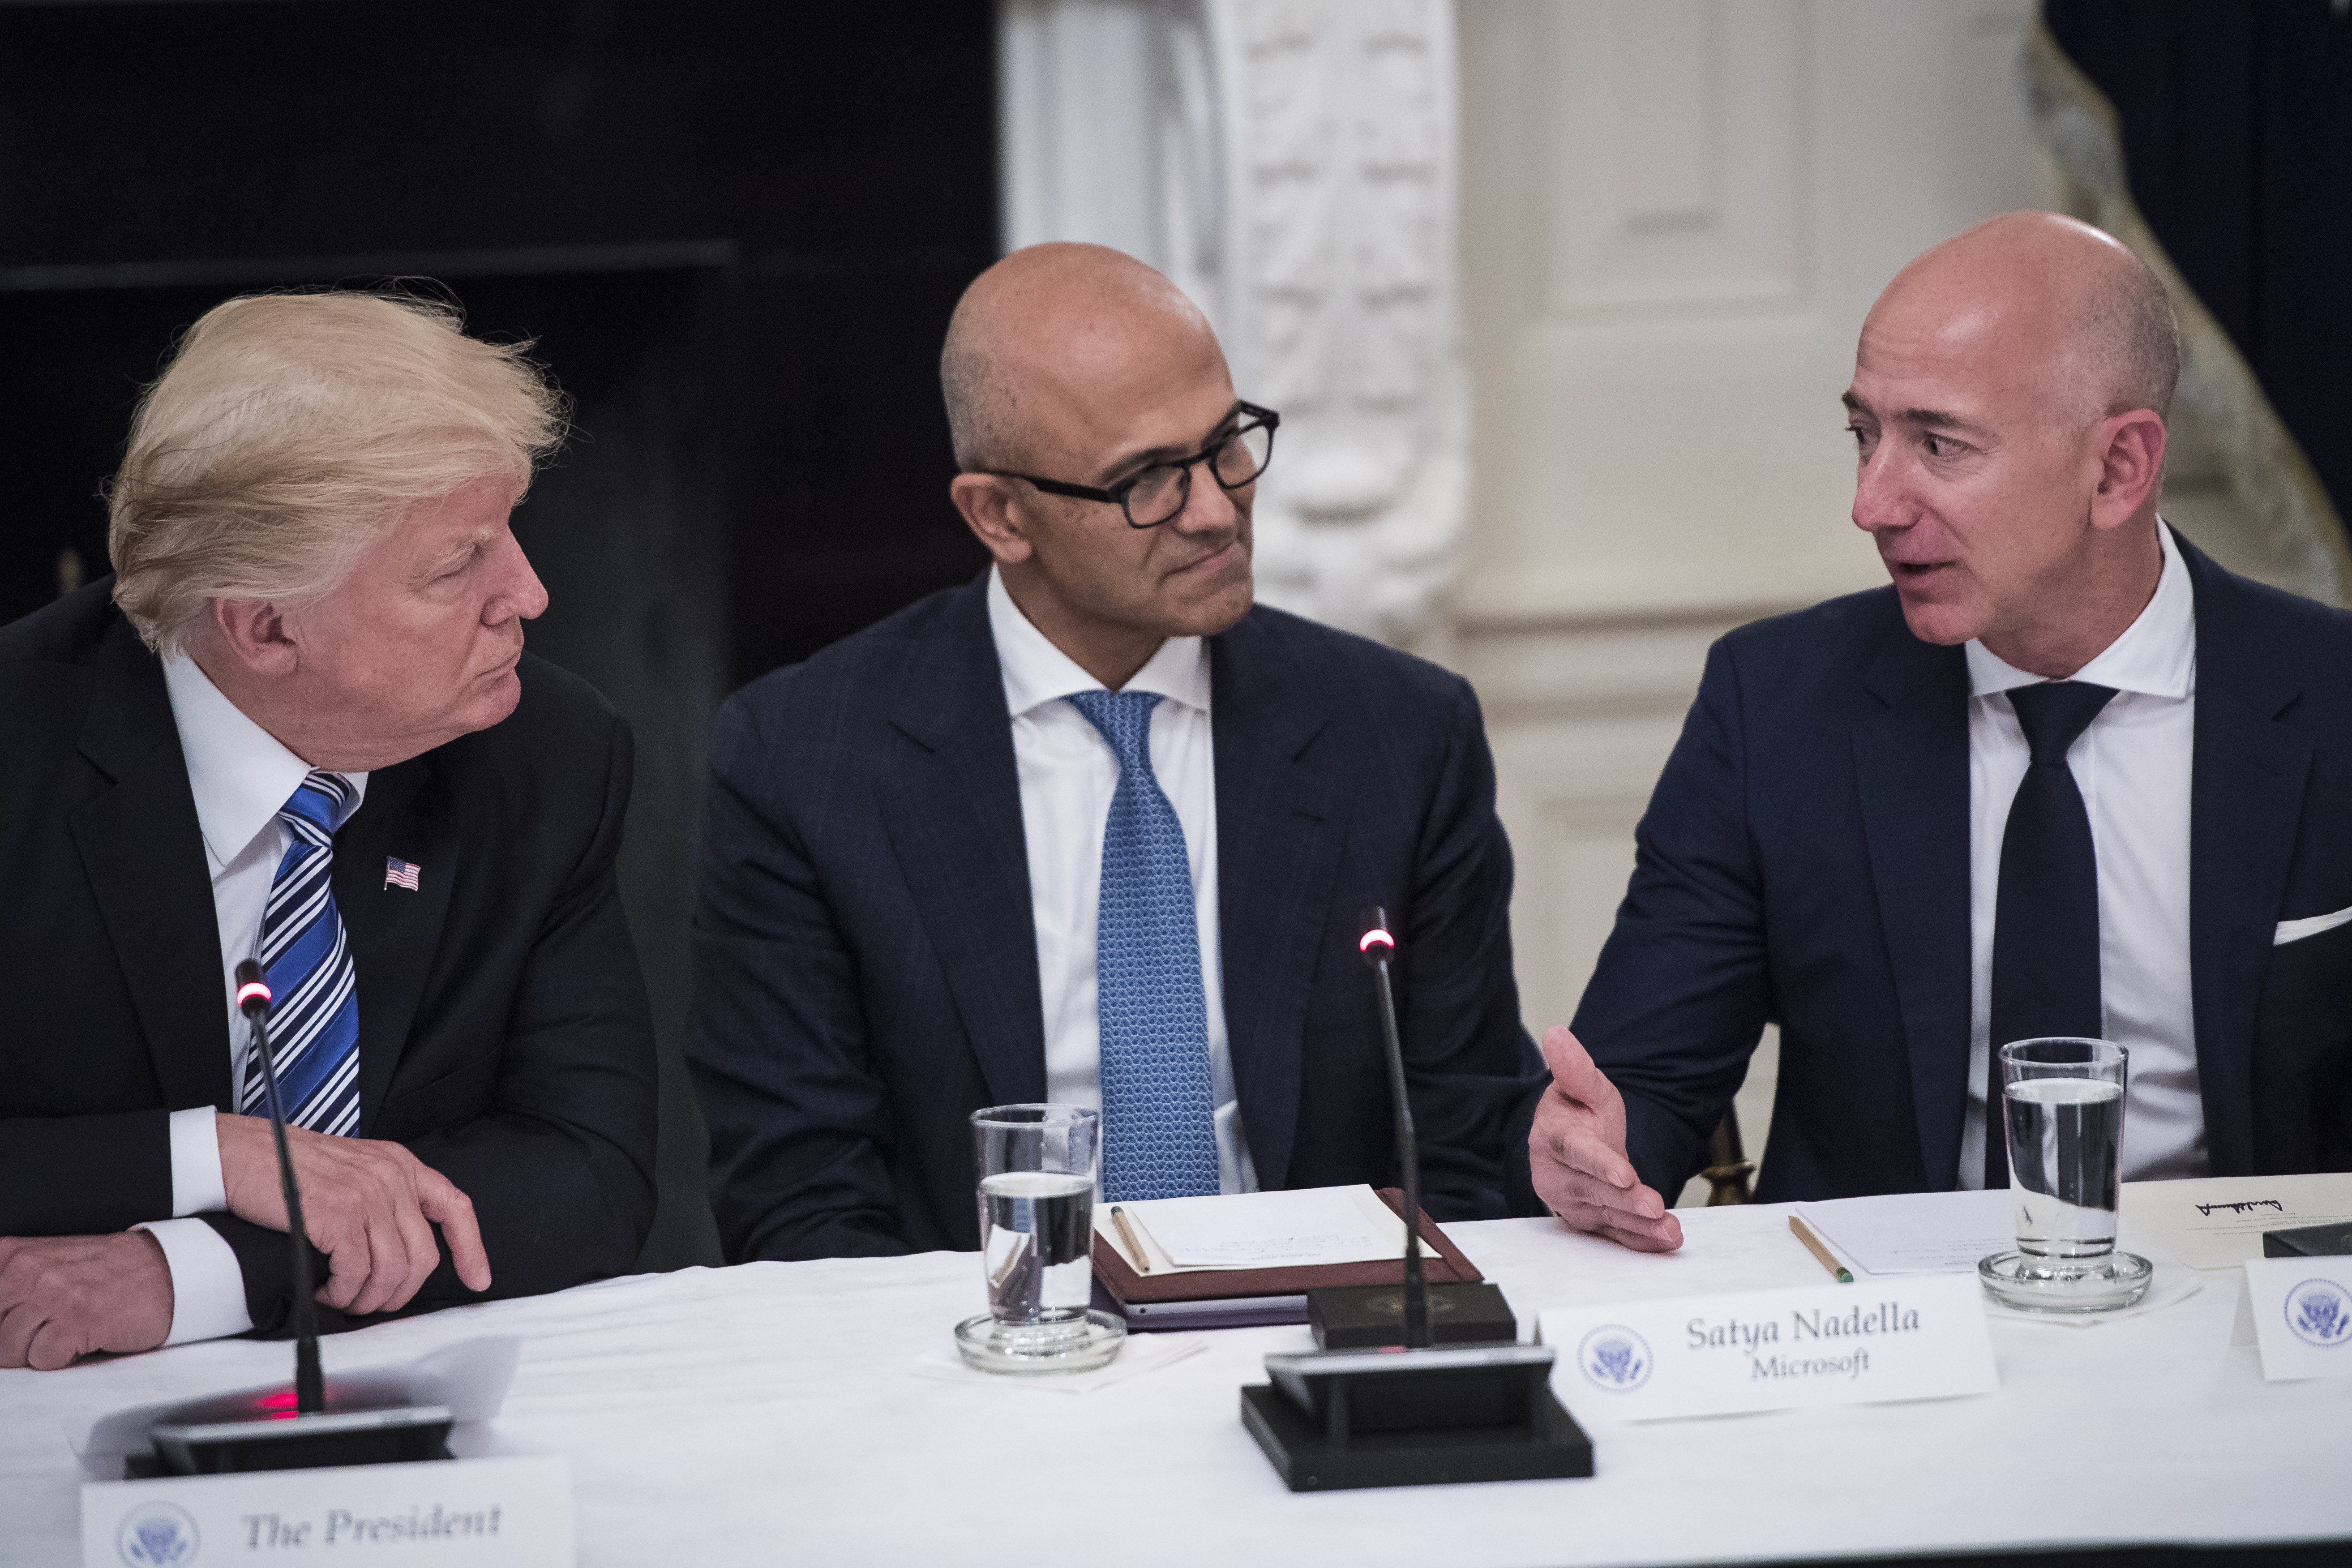 President Trump and Microsoft CEO Satya Nadella listen to Amazon CEO Jeff Bezos speak. All three are seated at a conference table.